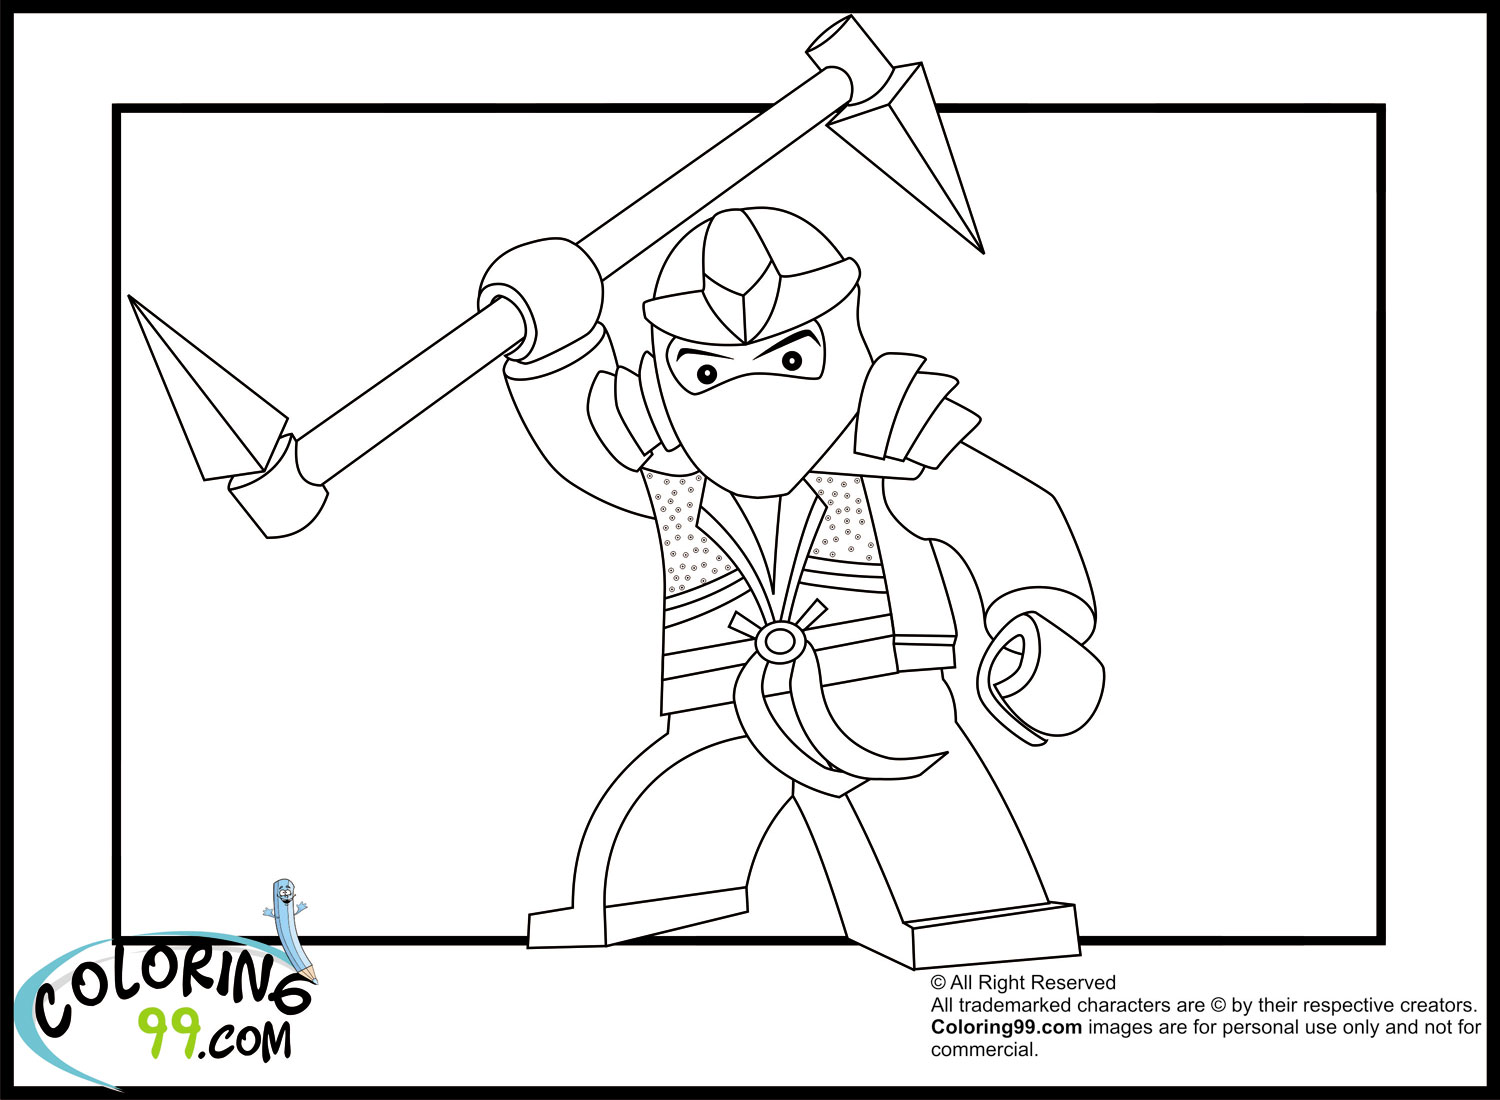 LEGO Ninjago Coloring Pages  Minister Coloring